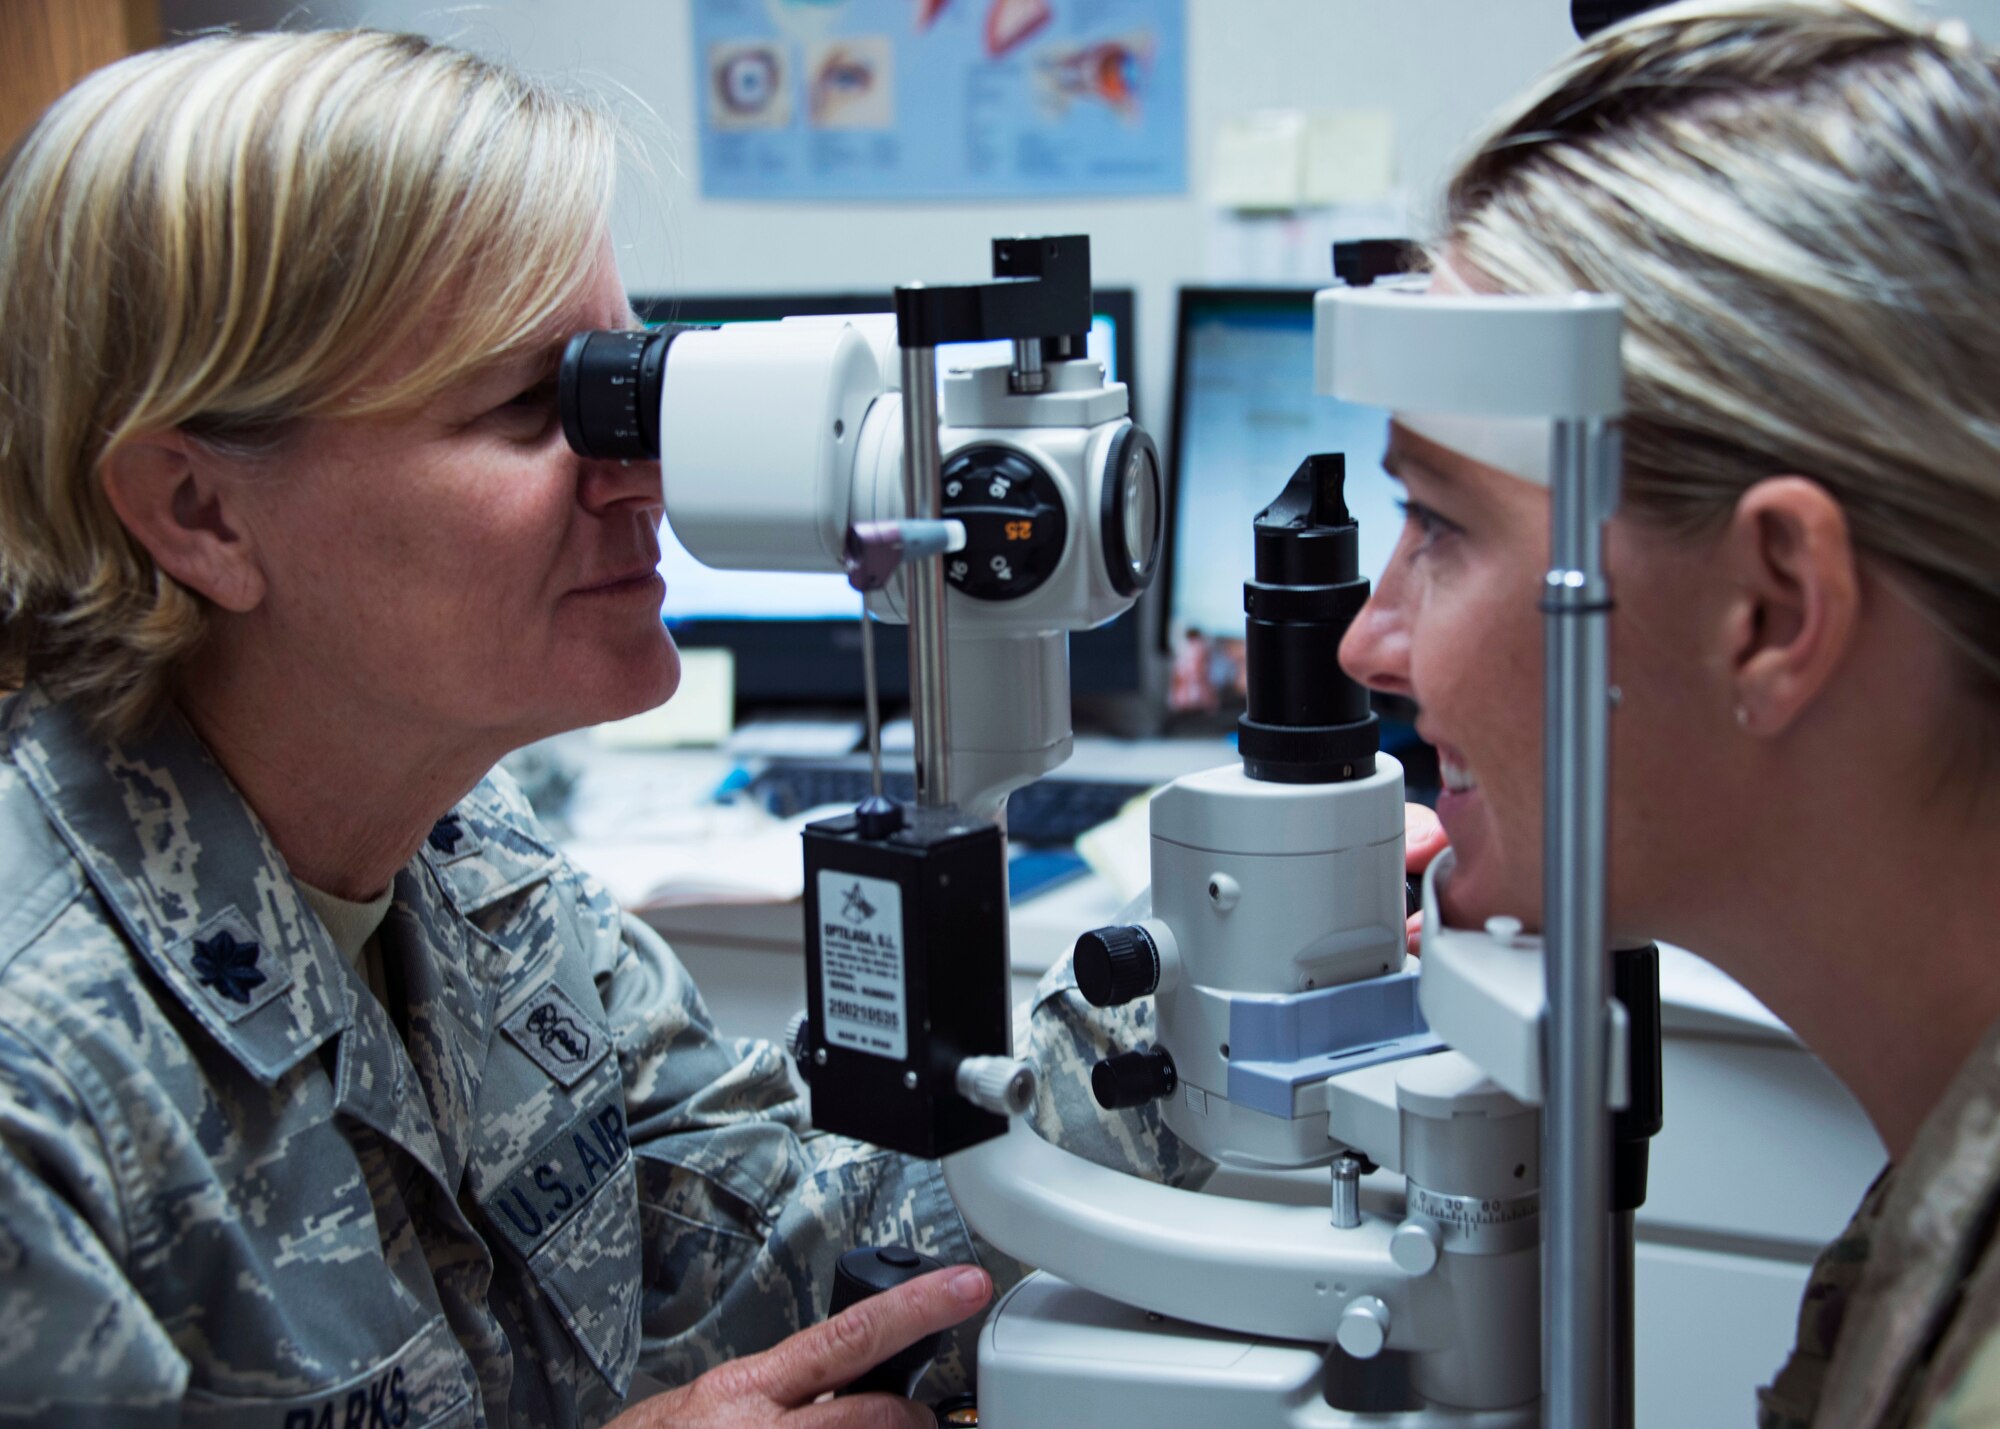 Lt. Col. Kelli Parks, an optometrist with the 919th Special Operations Medical Squadron, performs an eye exam on a fellow Air Force reservist Aug. 5, 2018 at Hurlburt Field, Fla.